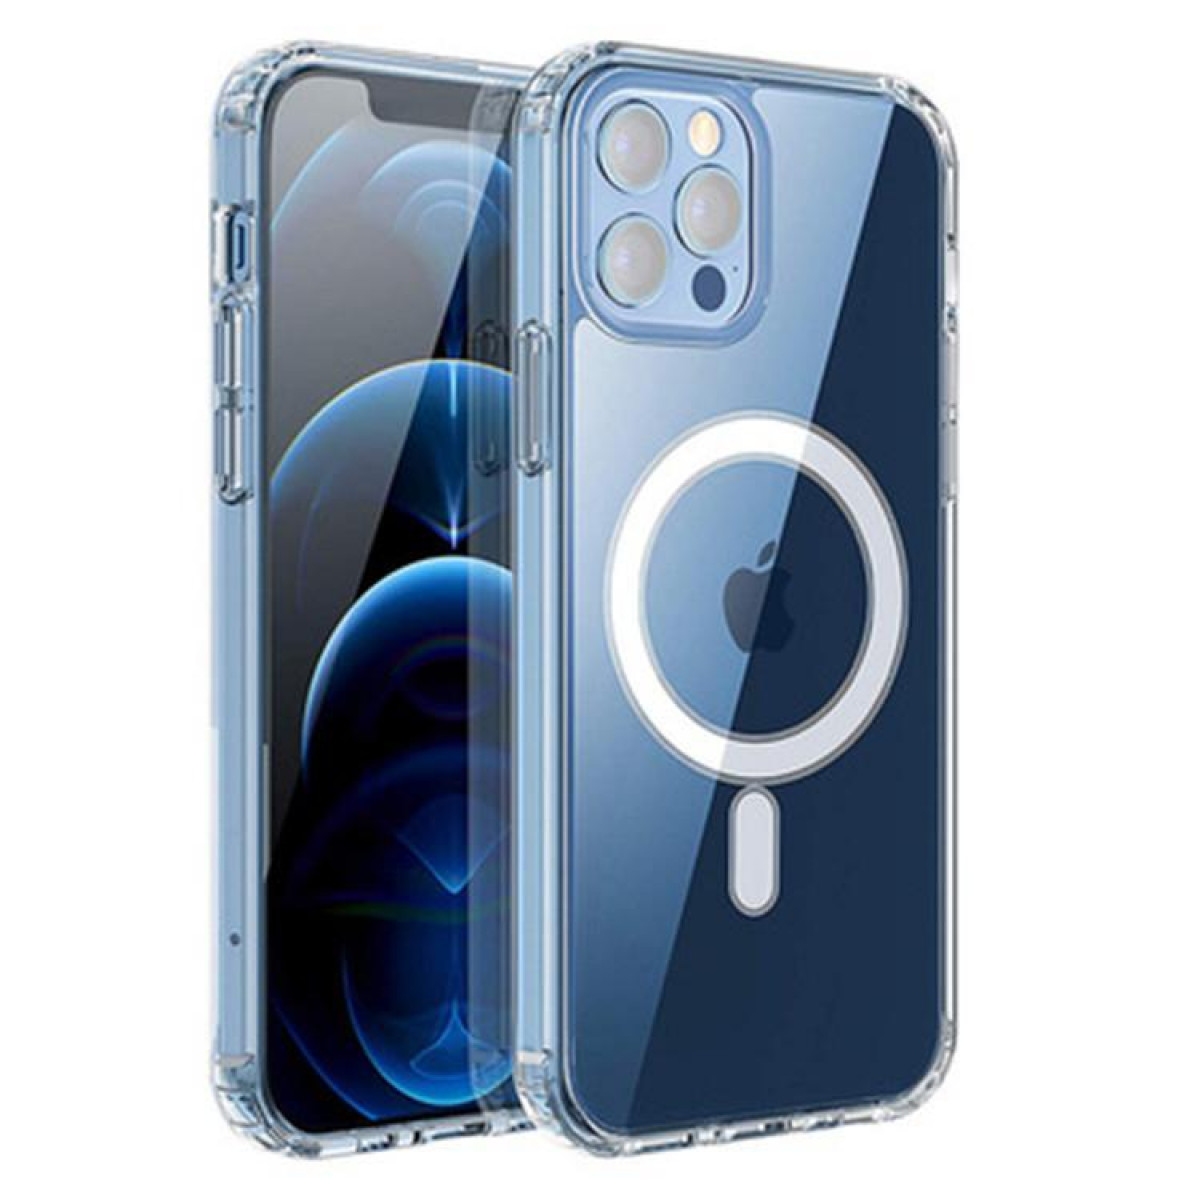 INF iPhone 11 Pro Max iPhone Transparent, für Pro Weiß Backcover, iPhone, 11 Max, MagSafe-Ladegerät Handyhülle